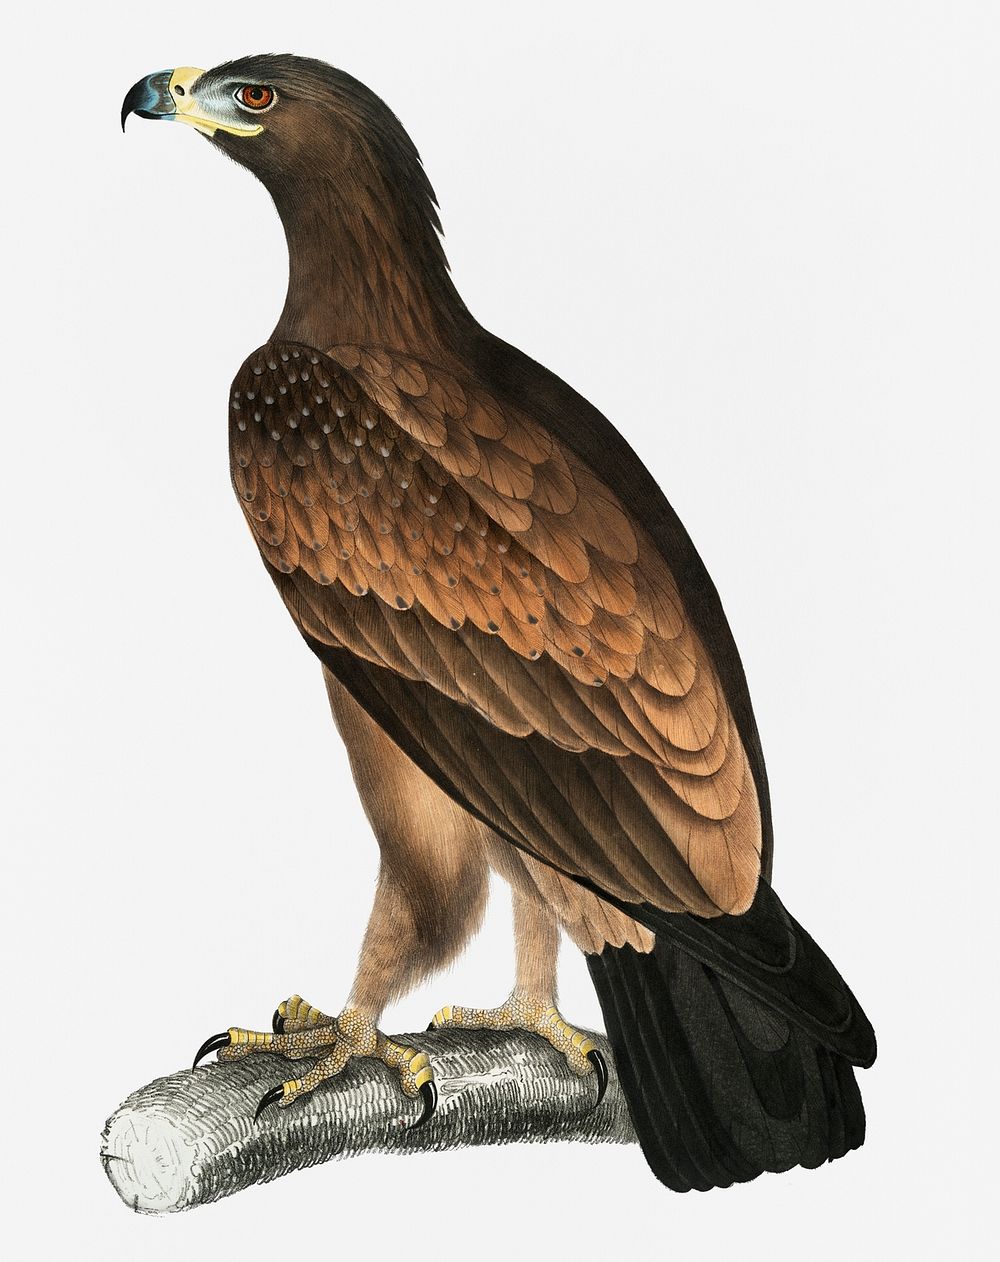 Brown Eagle (Aquilla fusca) from Illustrations of Indian zoology (1830-1834) by John Edward Gray (1800-1875)